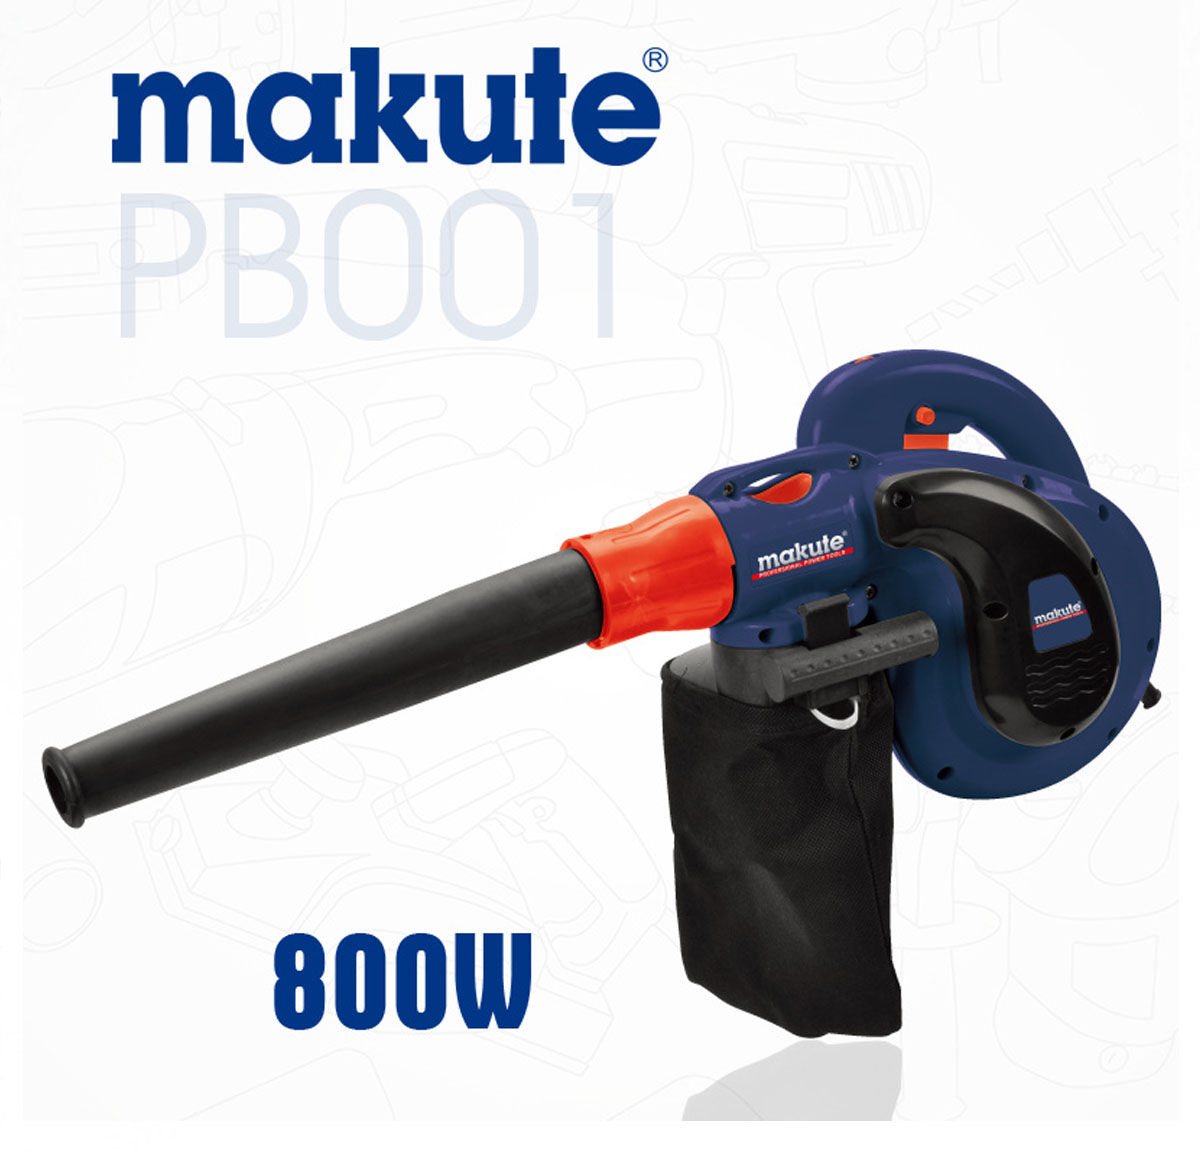 PB001 ELECTRIC BLOWER HEAVY DUTY WITH VACUME 800W